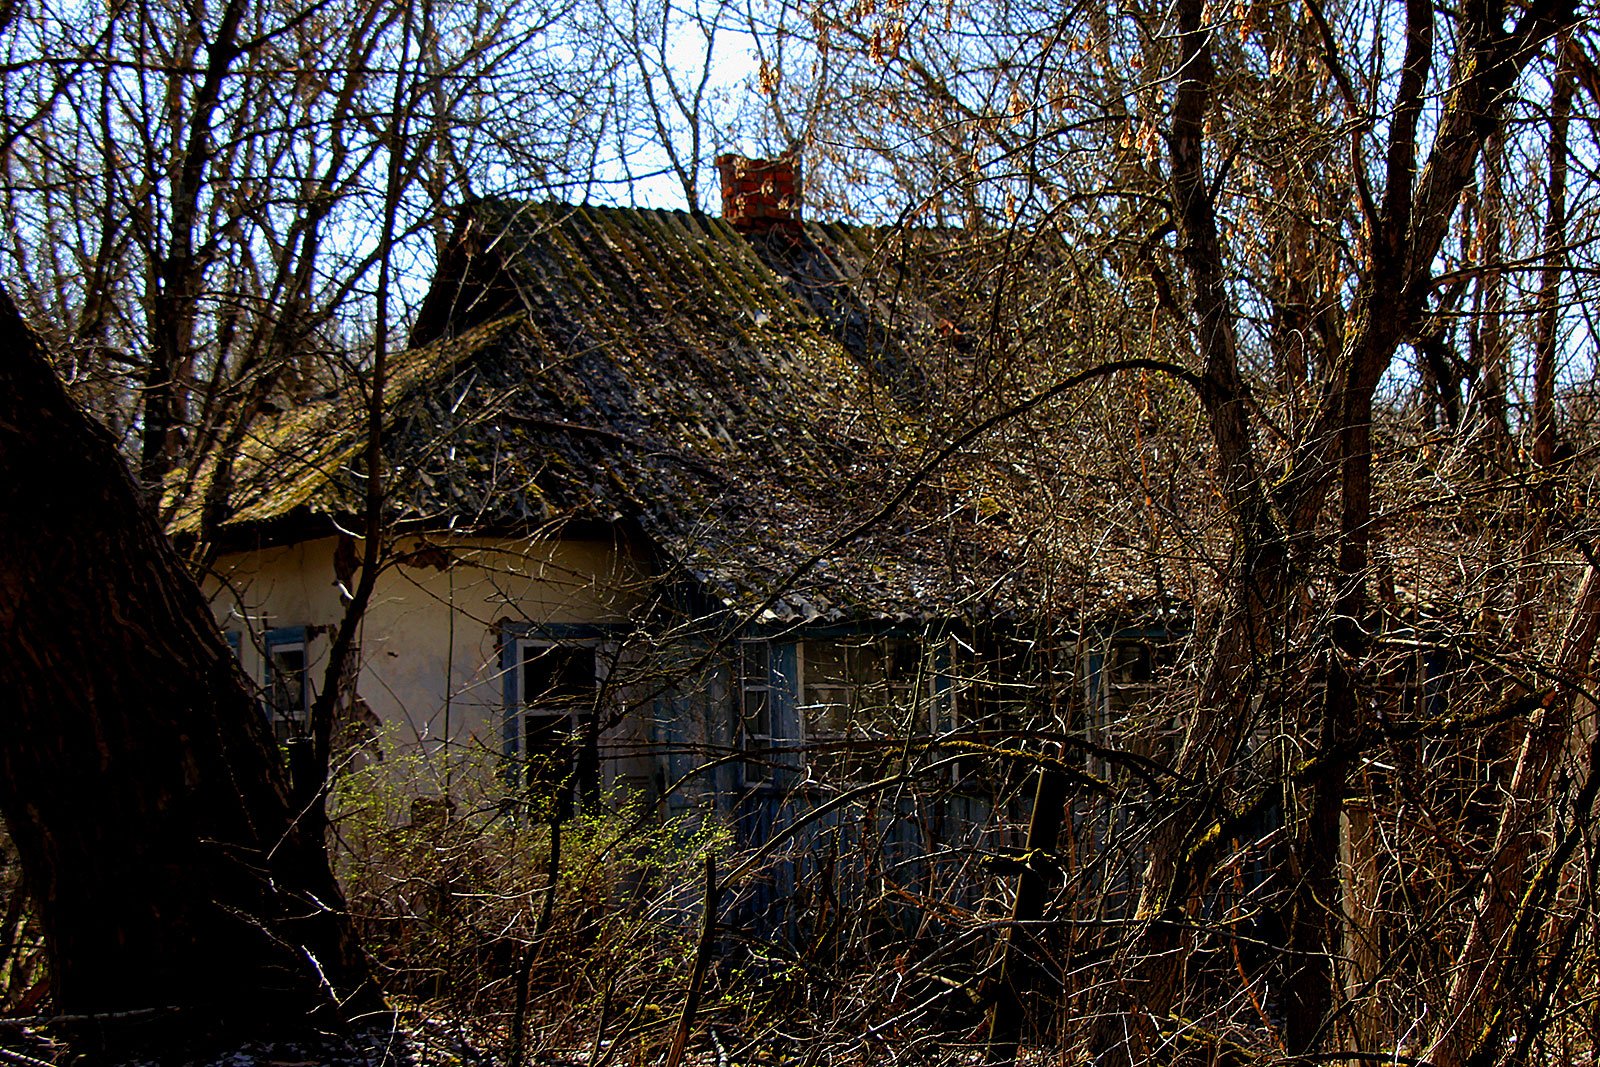 How to see ghost houses in the exclusion zone in Chernobyl